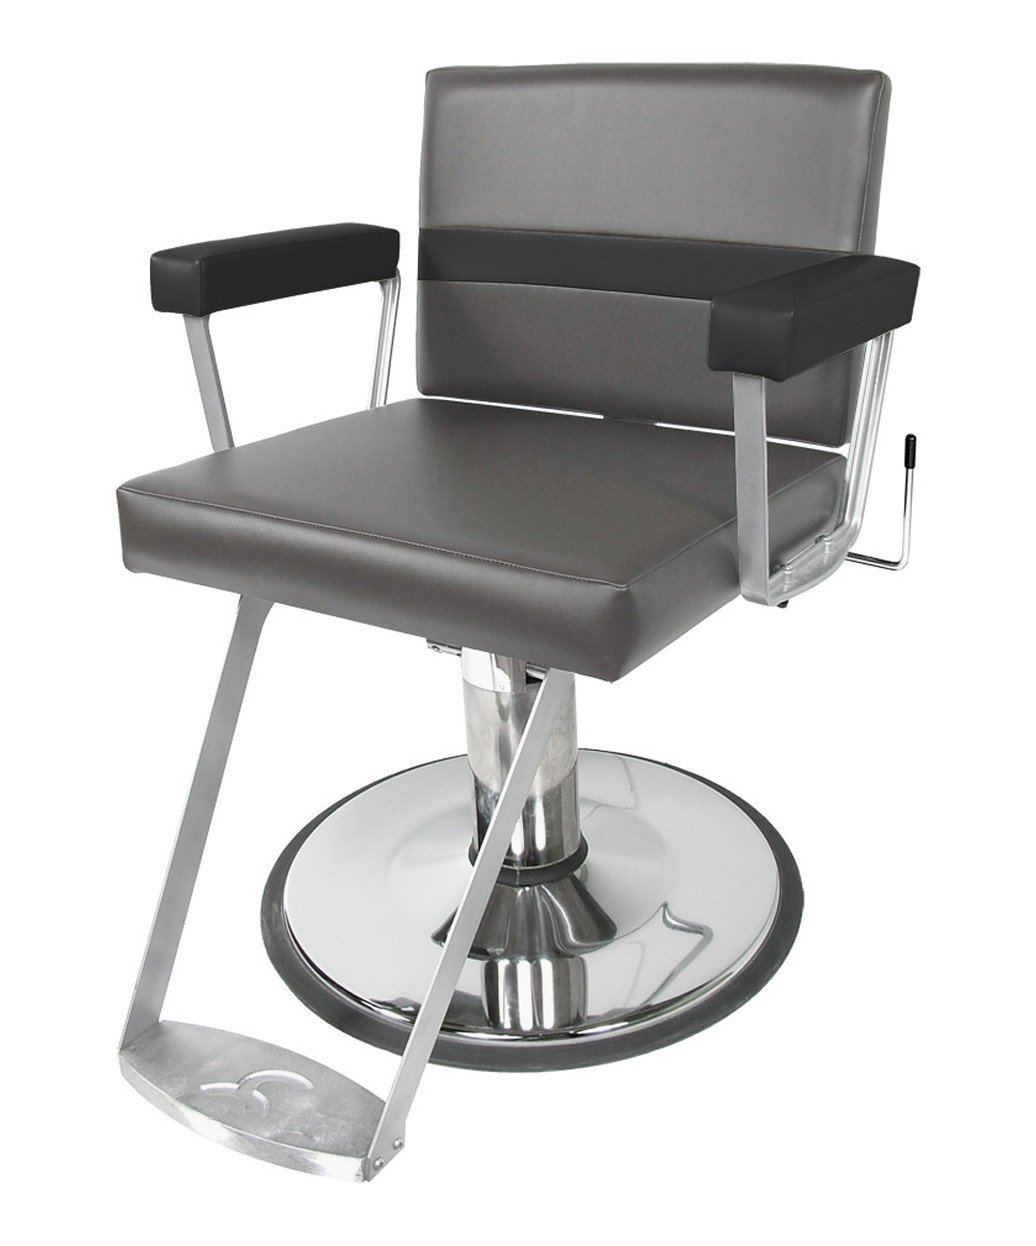 Collins 9810 Taress All Purpose Chair